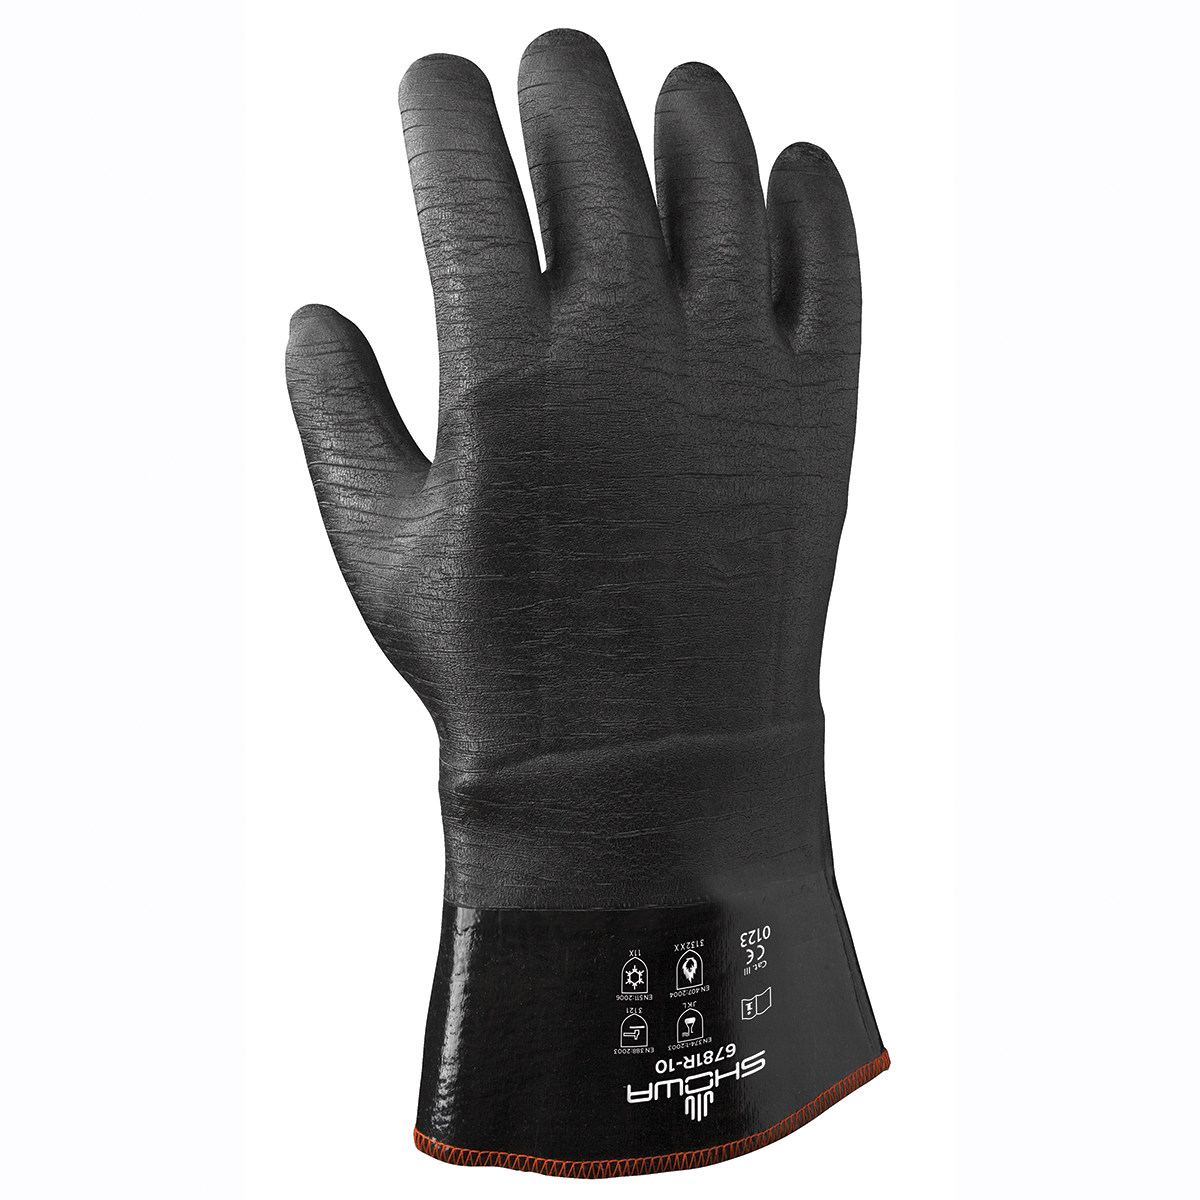 SHOWA® Size 10 Black Neoprene Cotton/Foam Insulation Lined Cold Weather Gloves